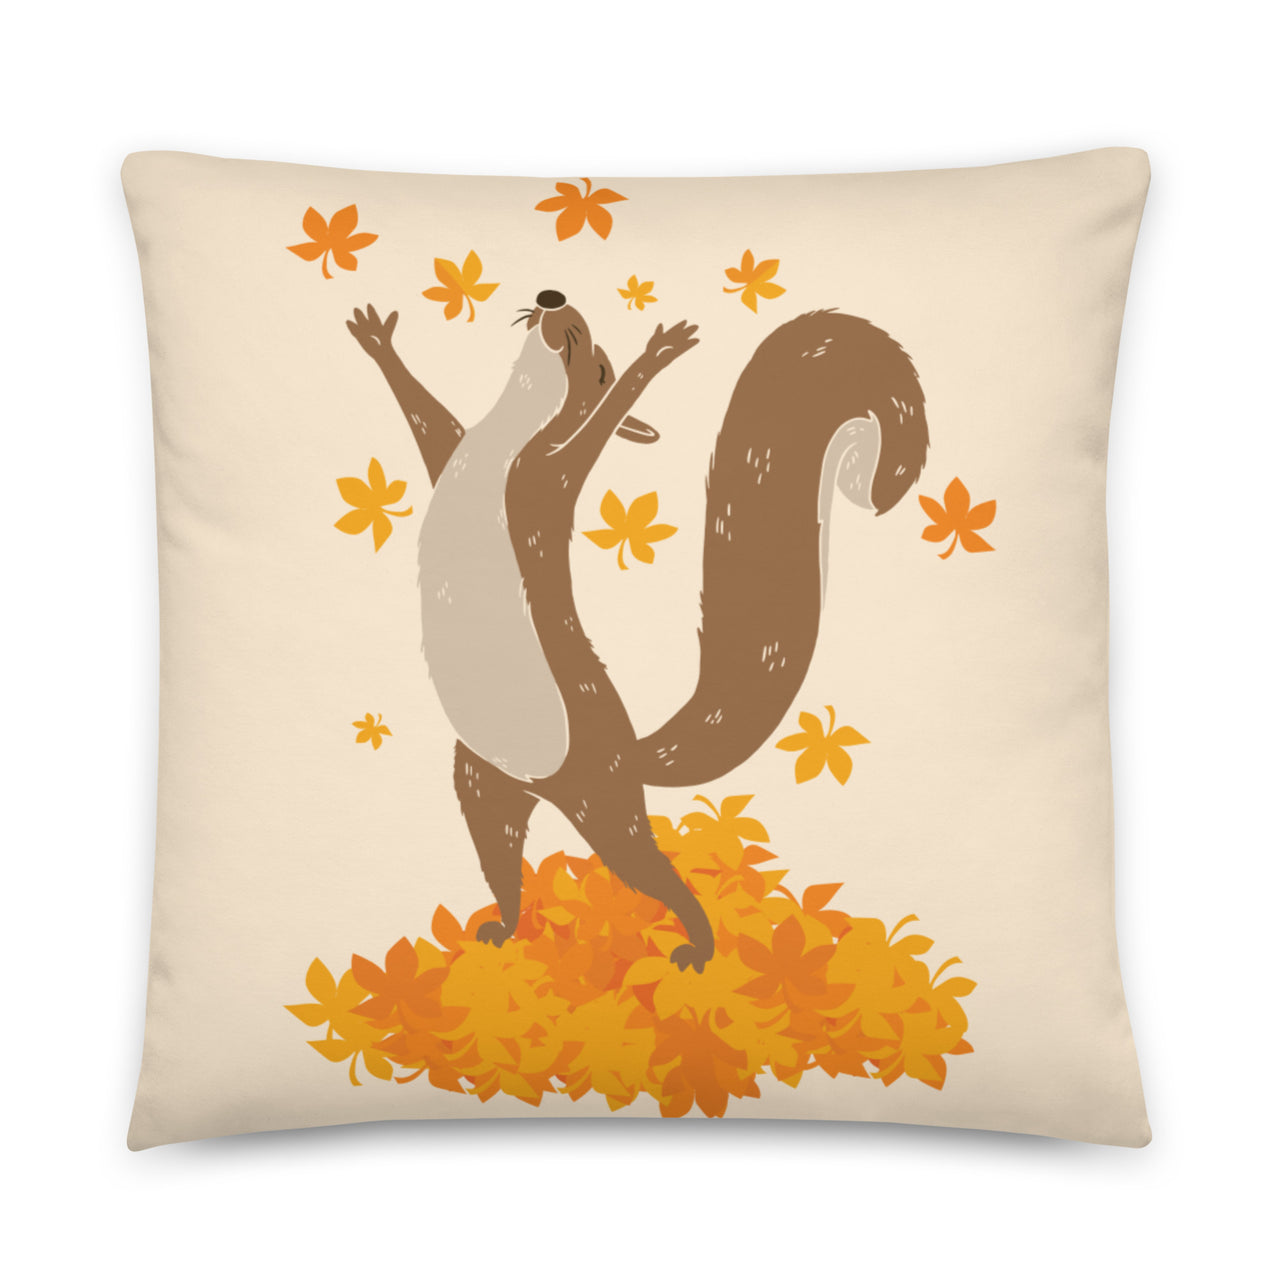 Squirrel Playing with Fall Leaves Pillow